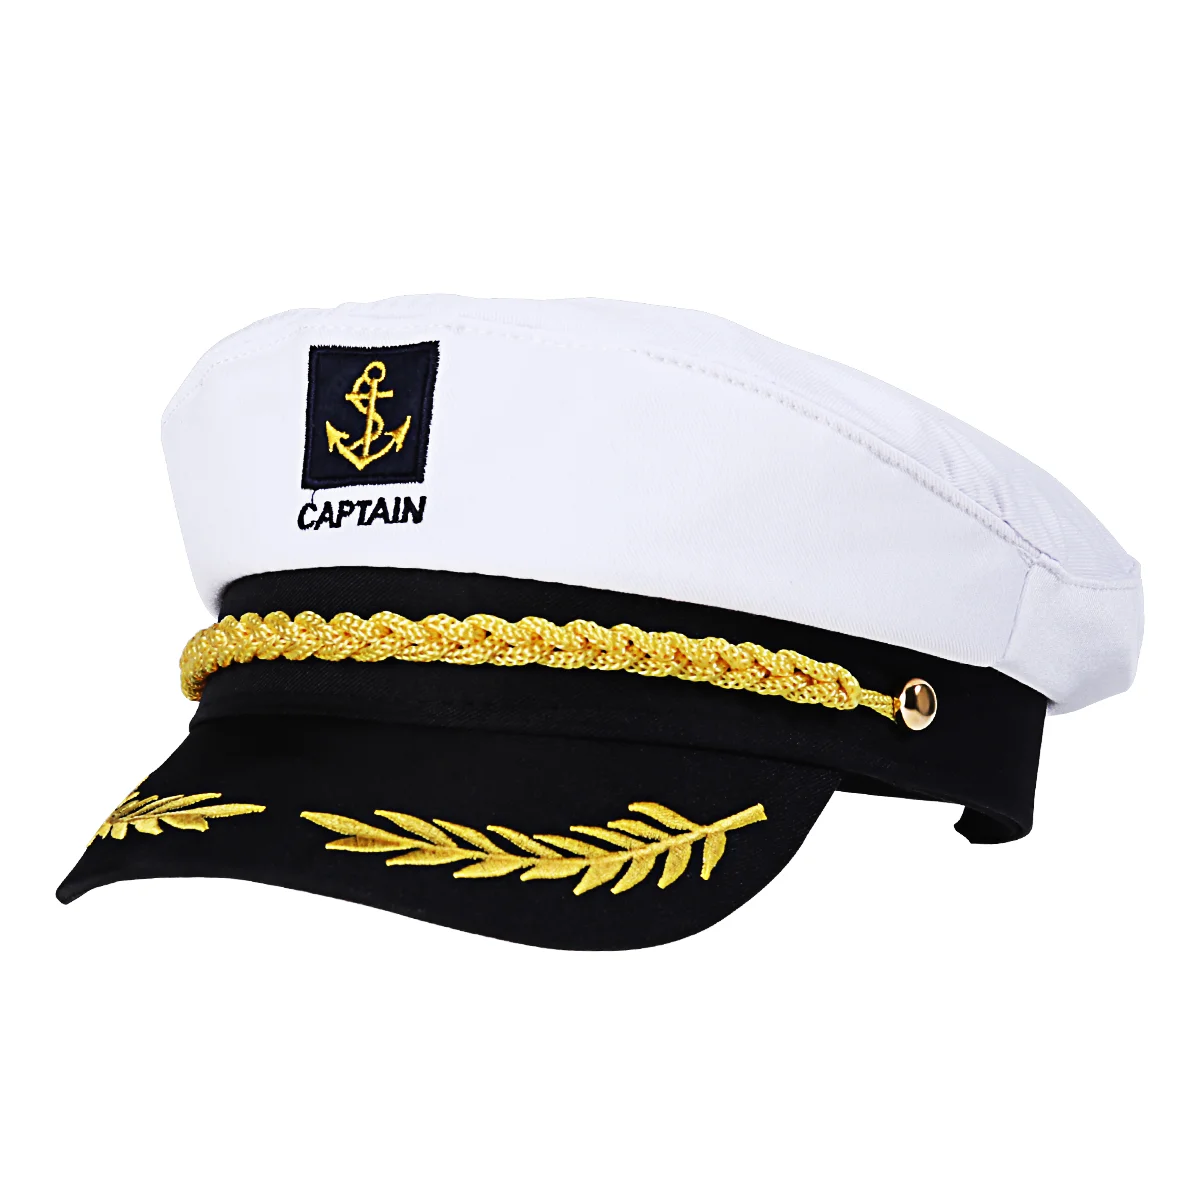 

Hat Captain Sailor Boat Captains Yacht Hats Costume Adult Navy Men Cap Ship Marine Party Admiral White Nautical Women Boating